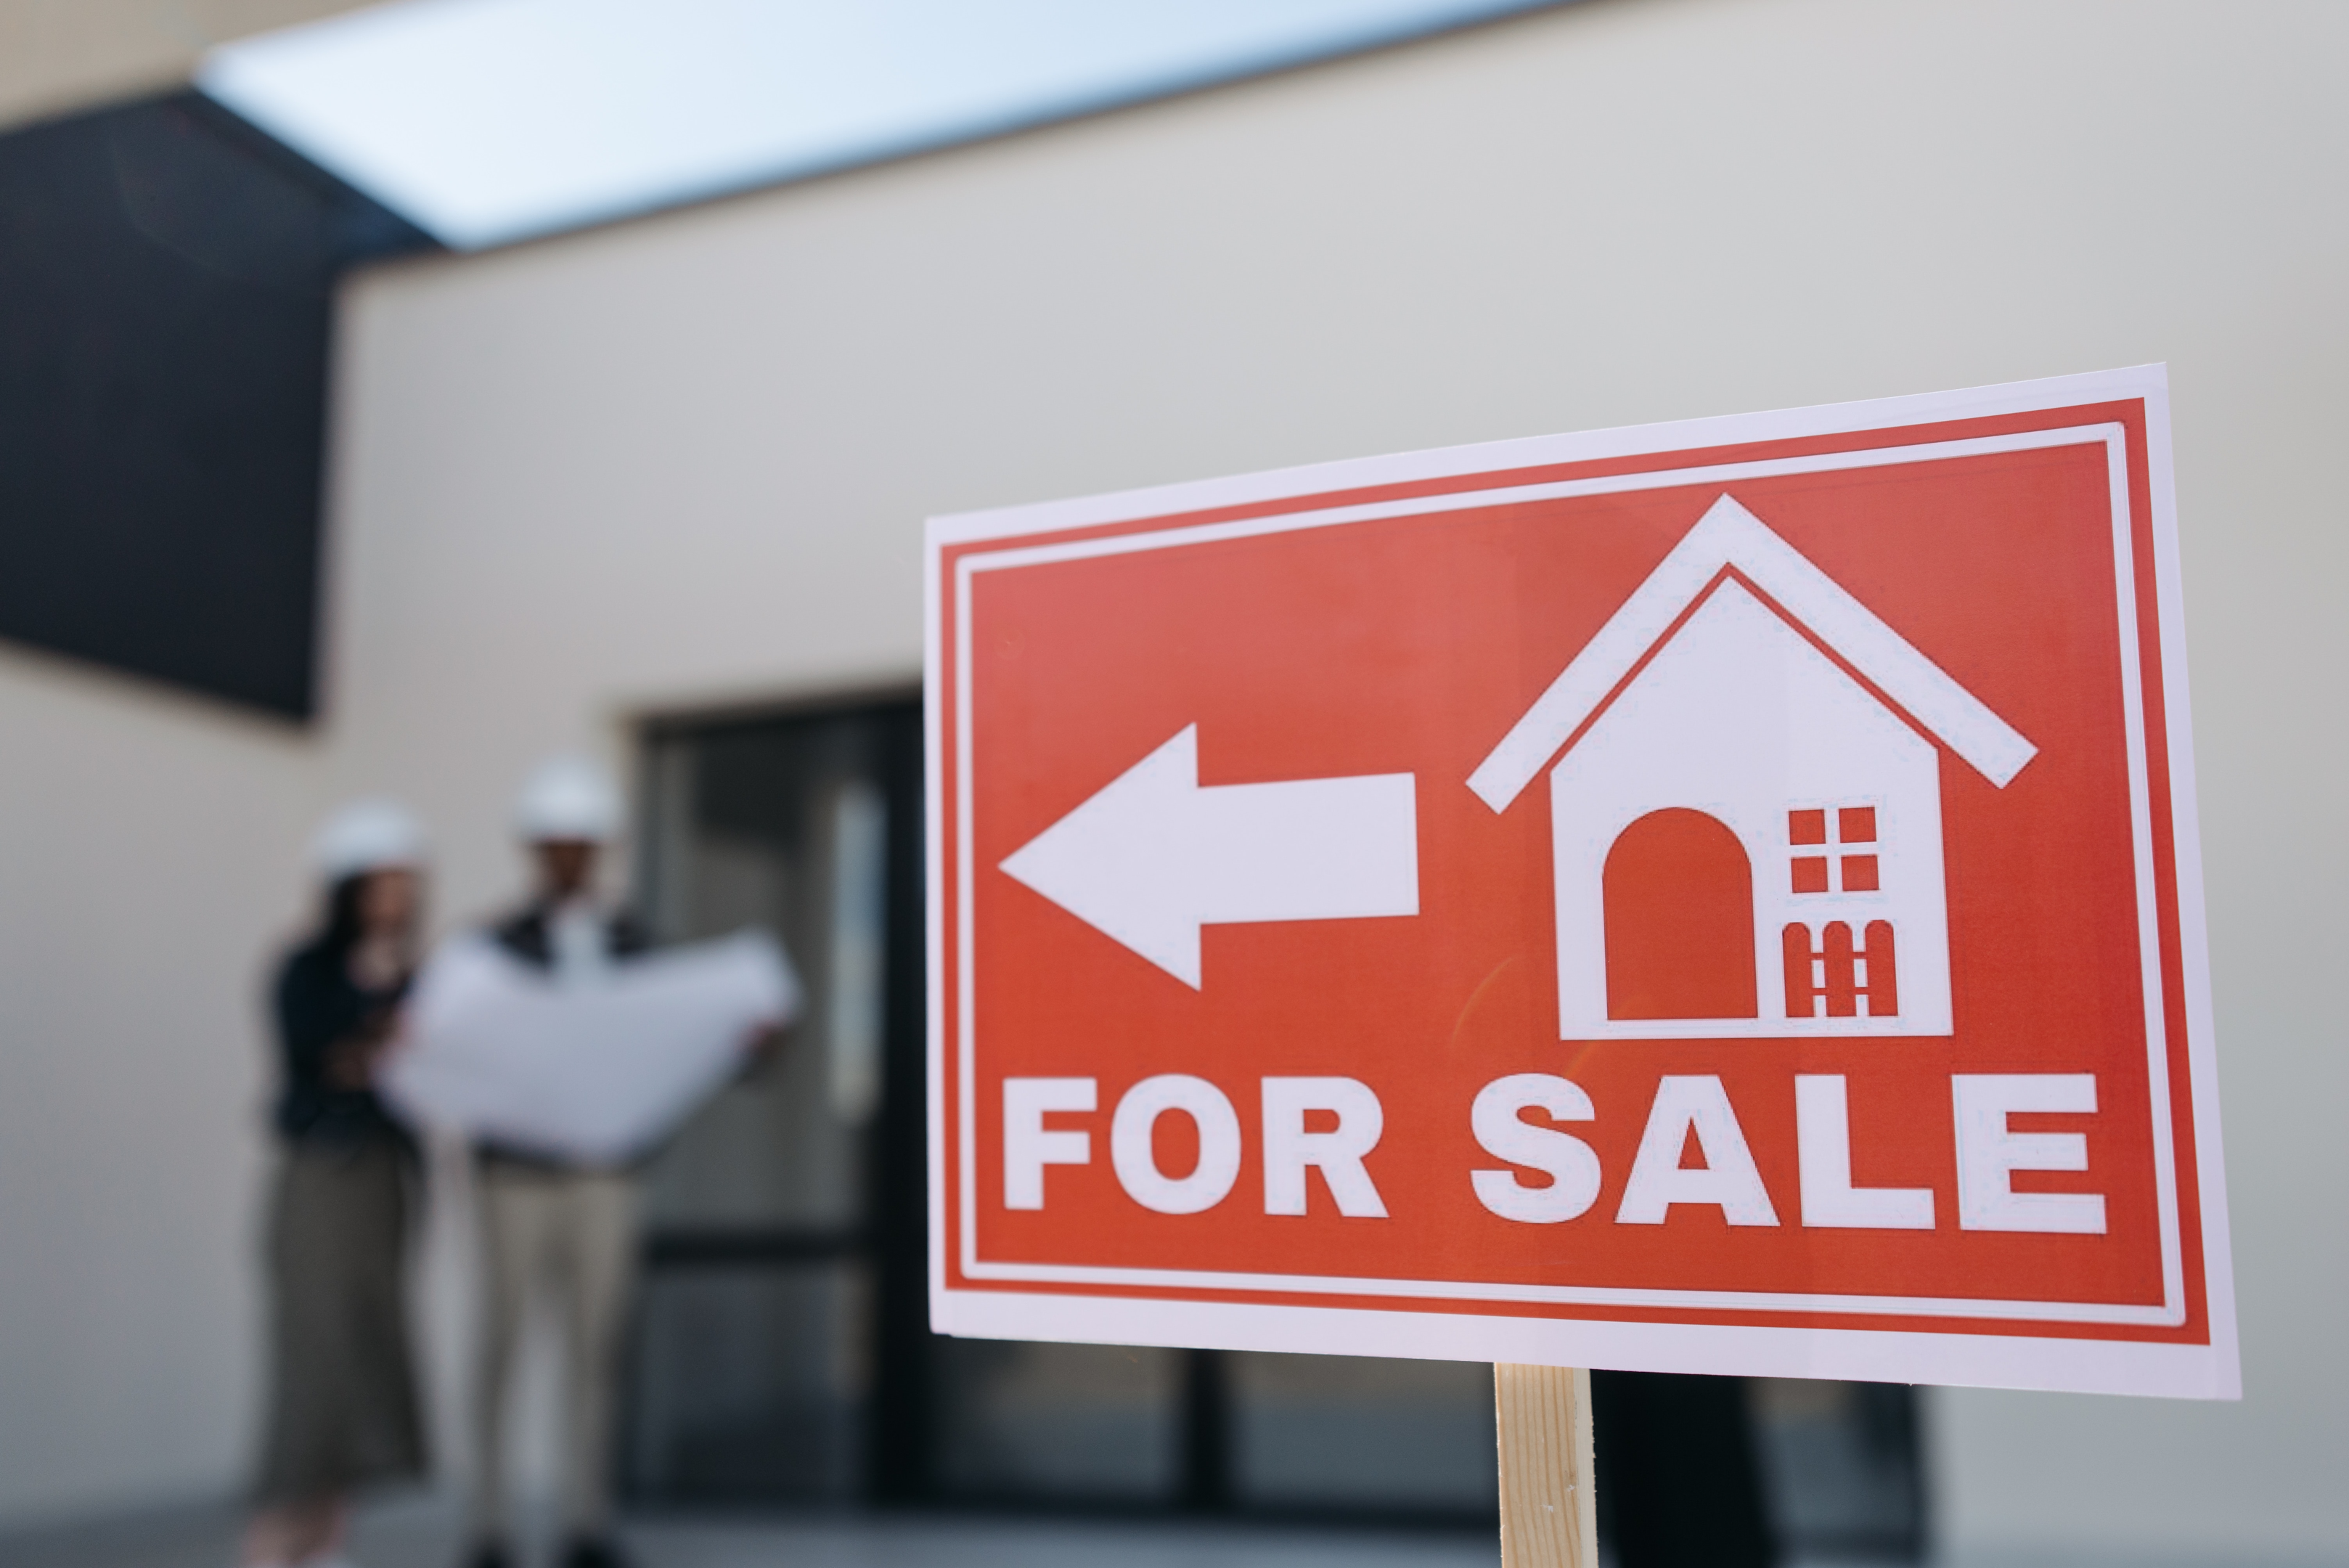 Thinking of selling a home? Check if you are ready to sell by reading these considerations | Photo by Pavel Danilyuk from Pexels